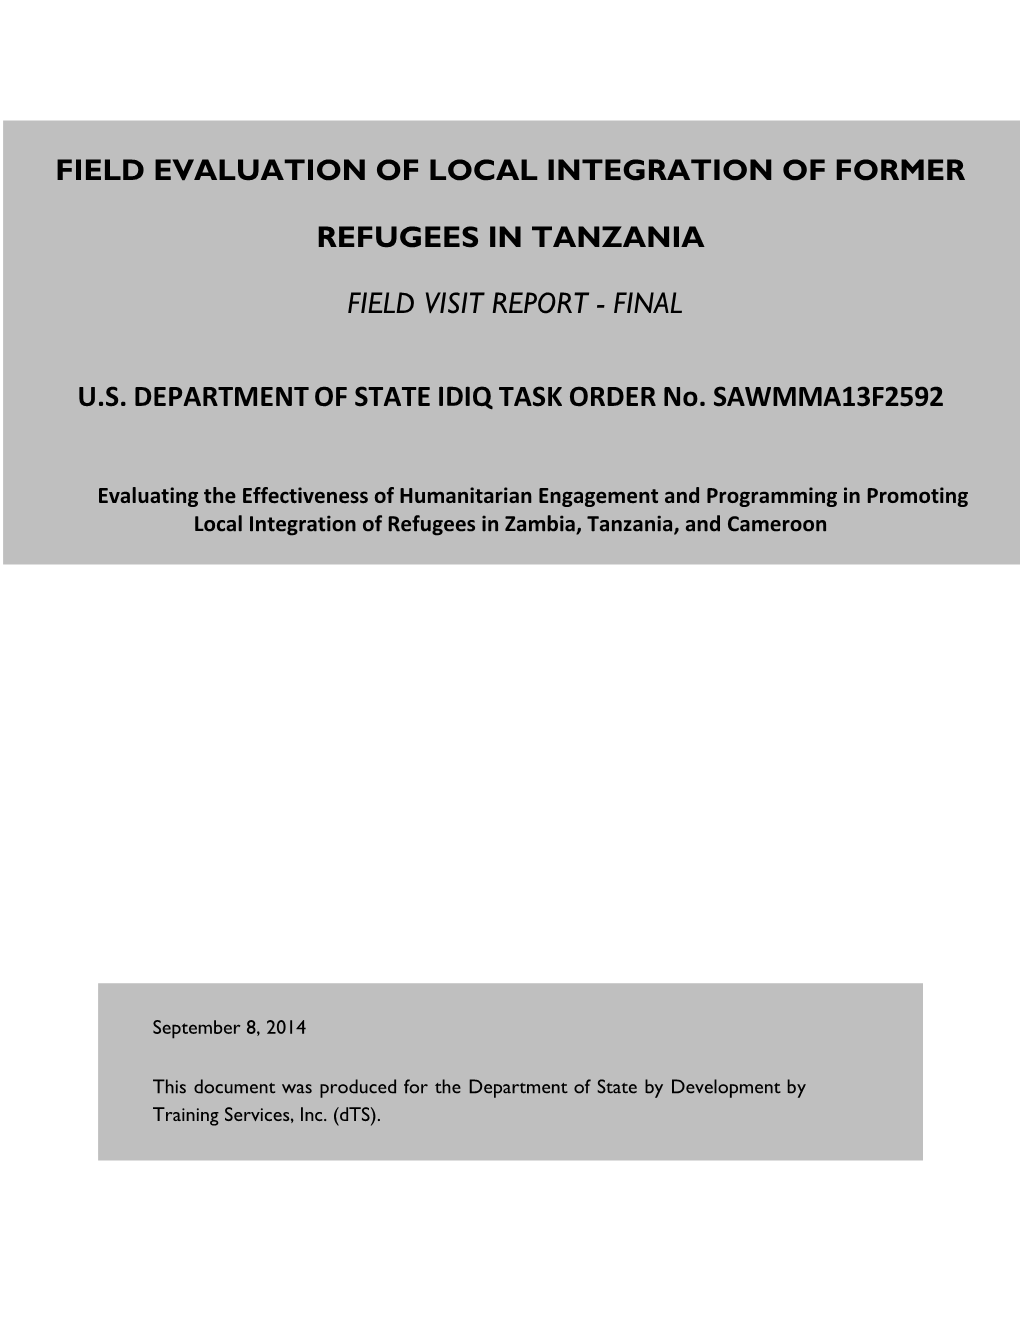 Field Evaluation of Local Integration of Former Refugees in Tanzania